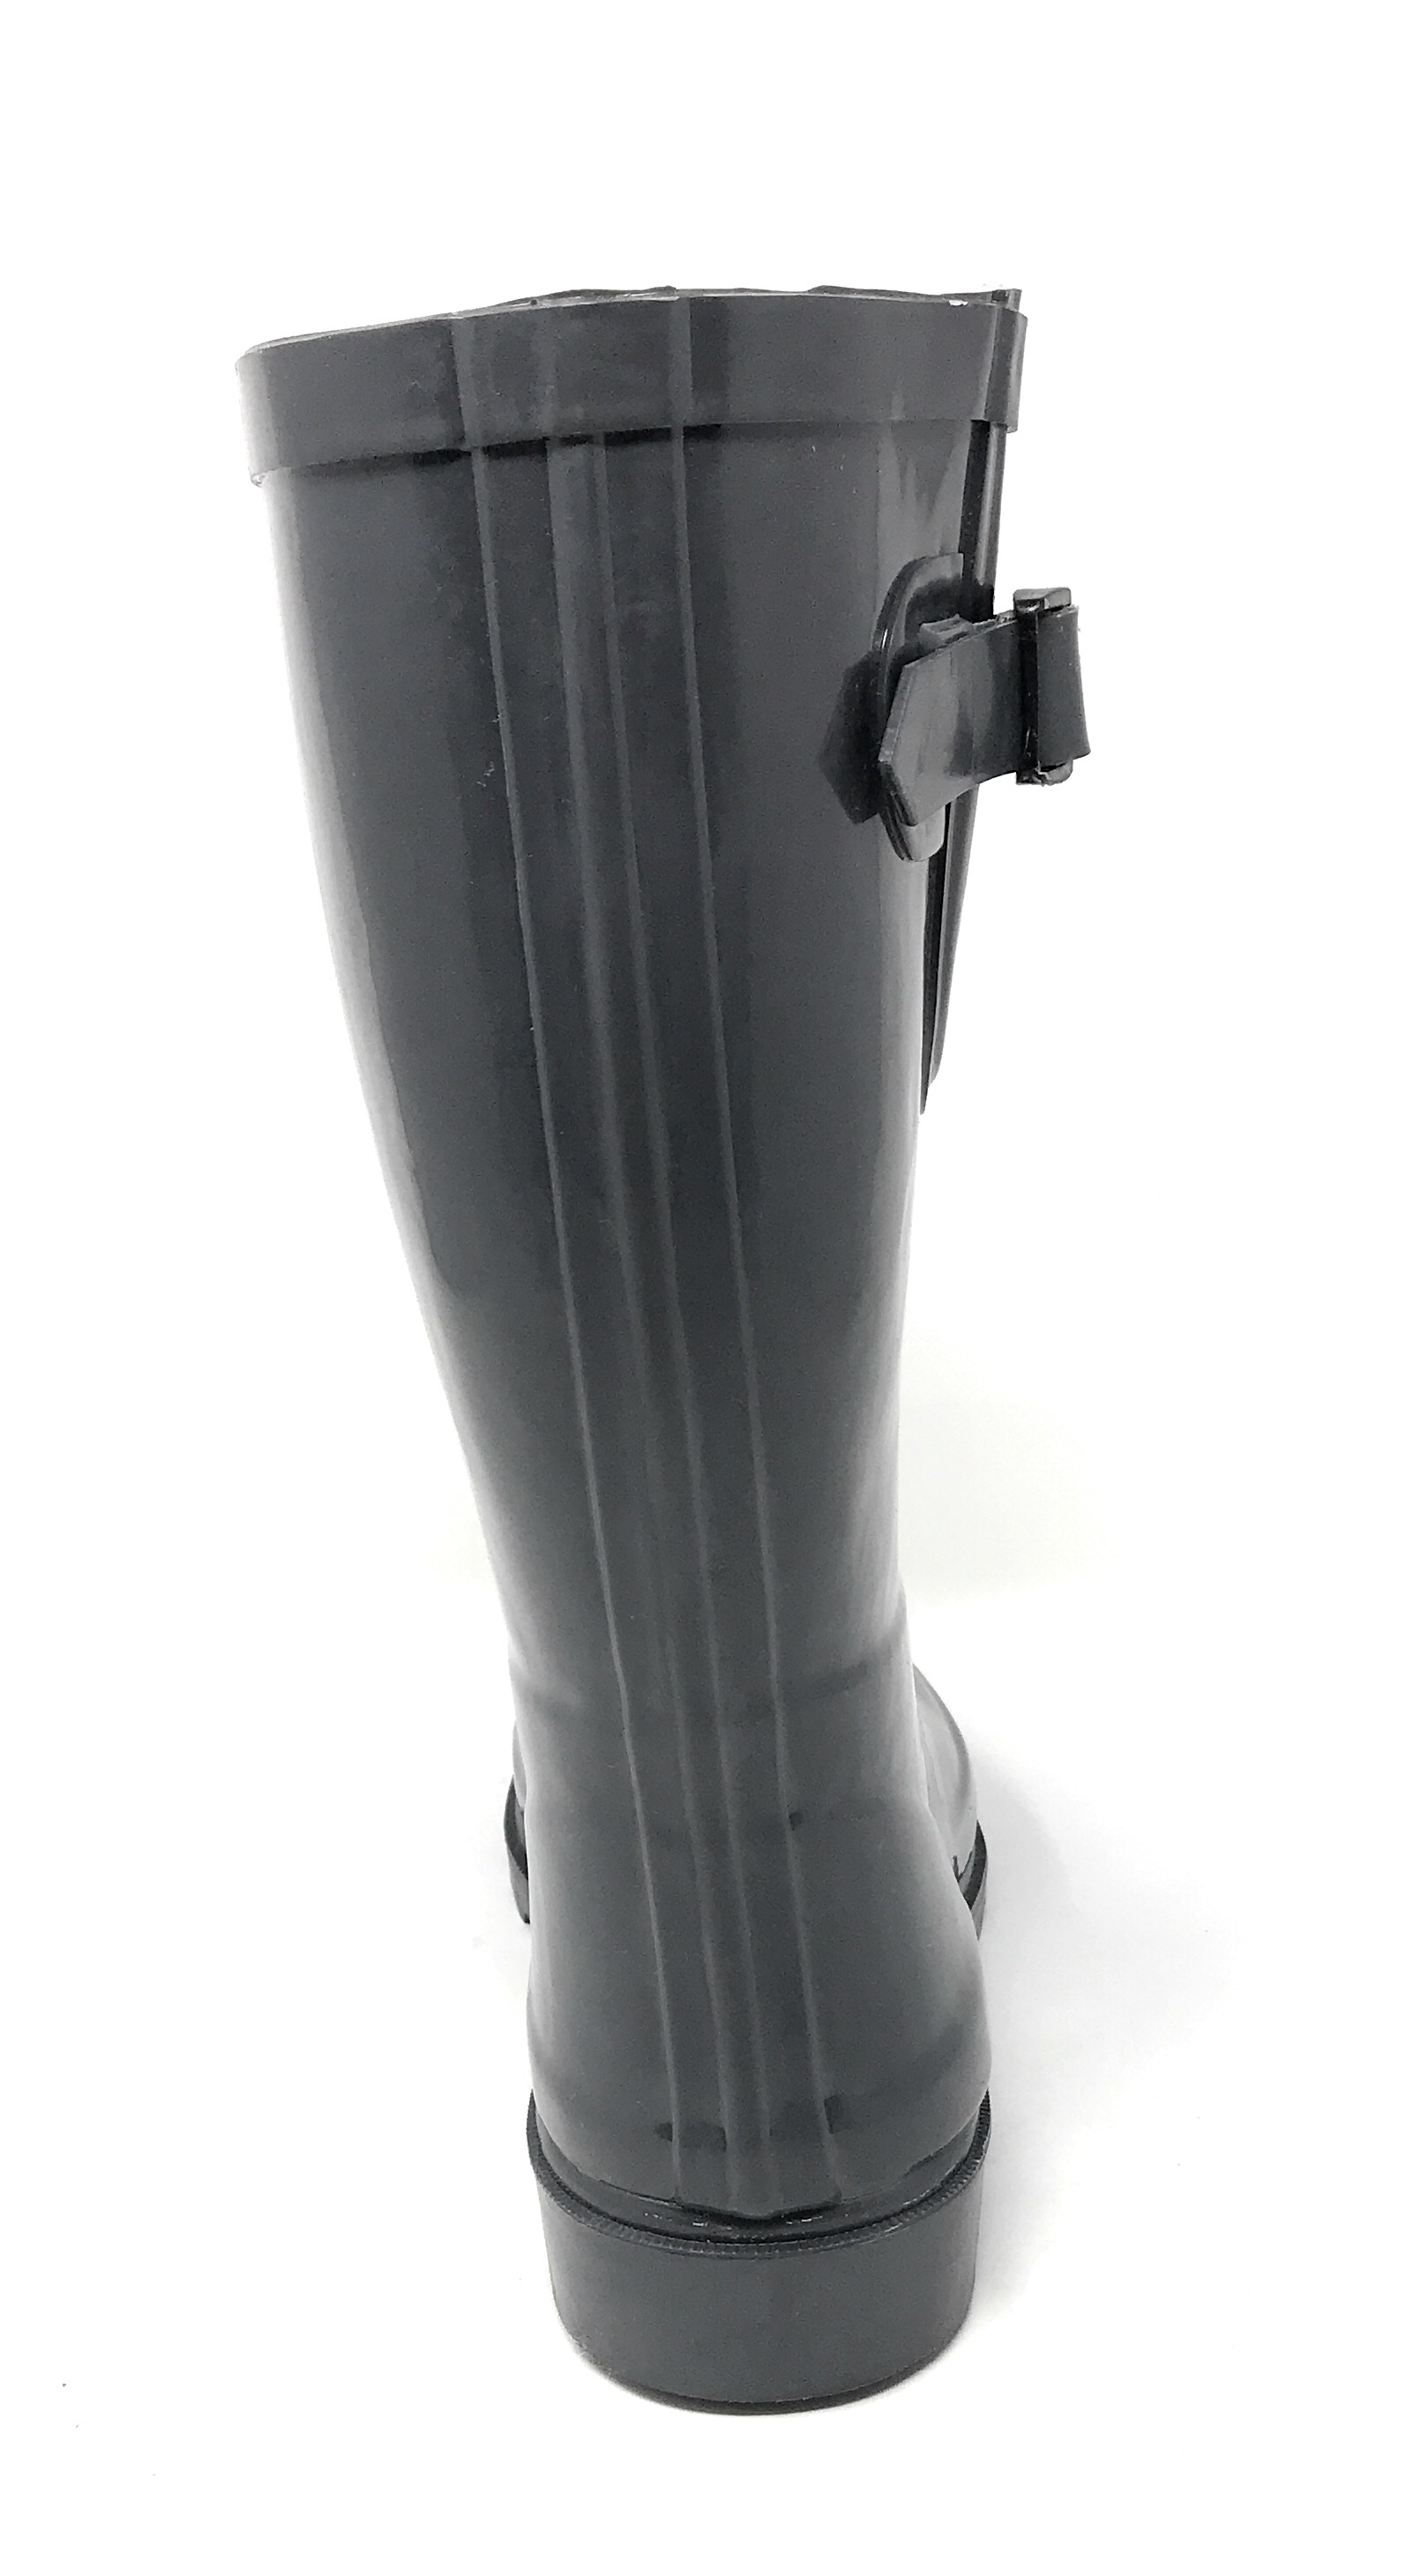 Forever Young Women's Short Shaft Rain Boots - image 2 of 5